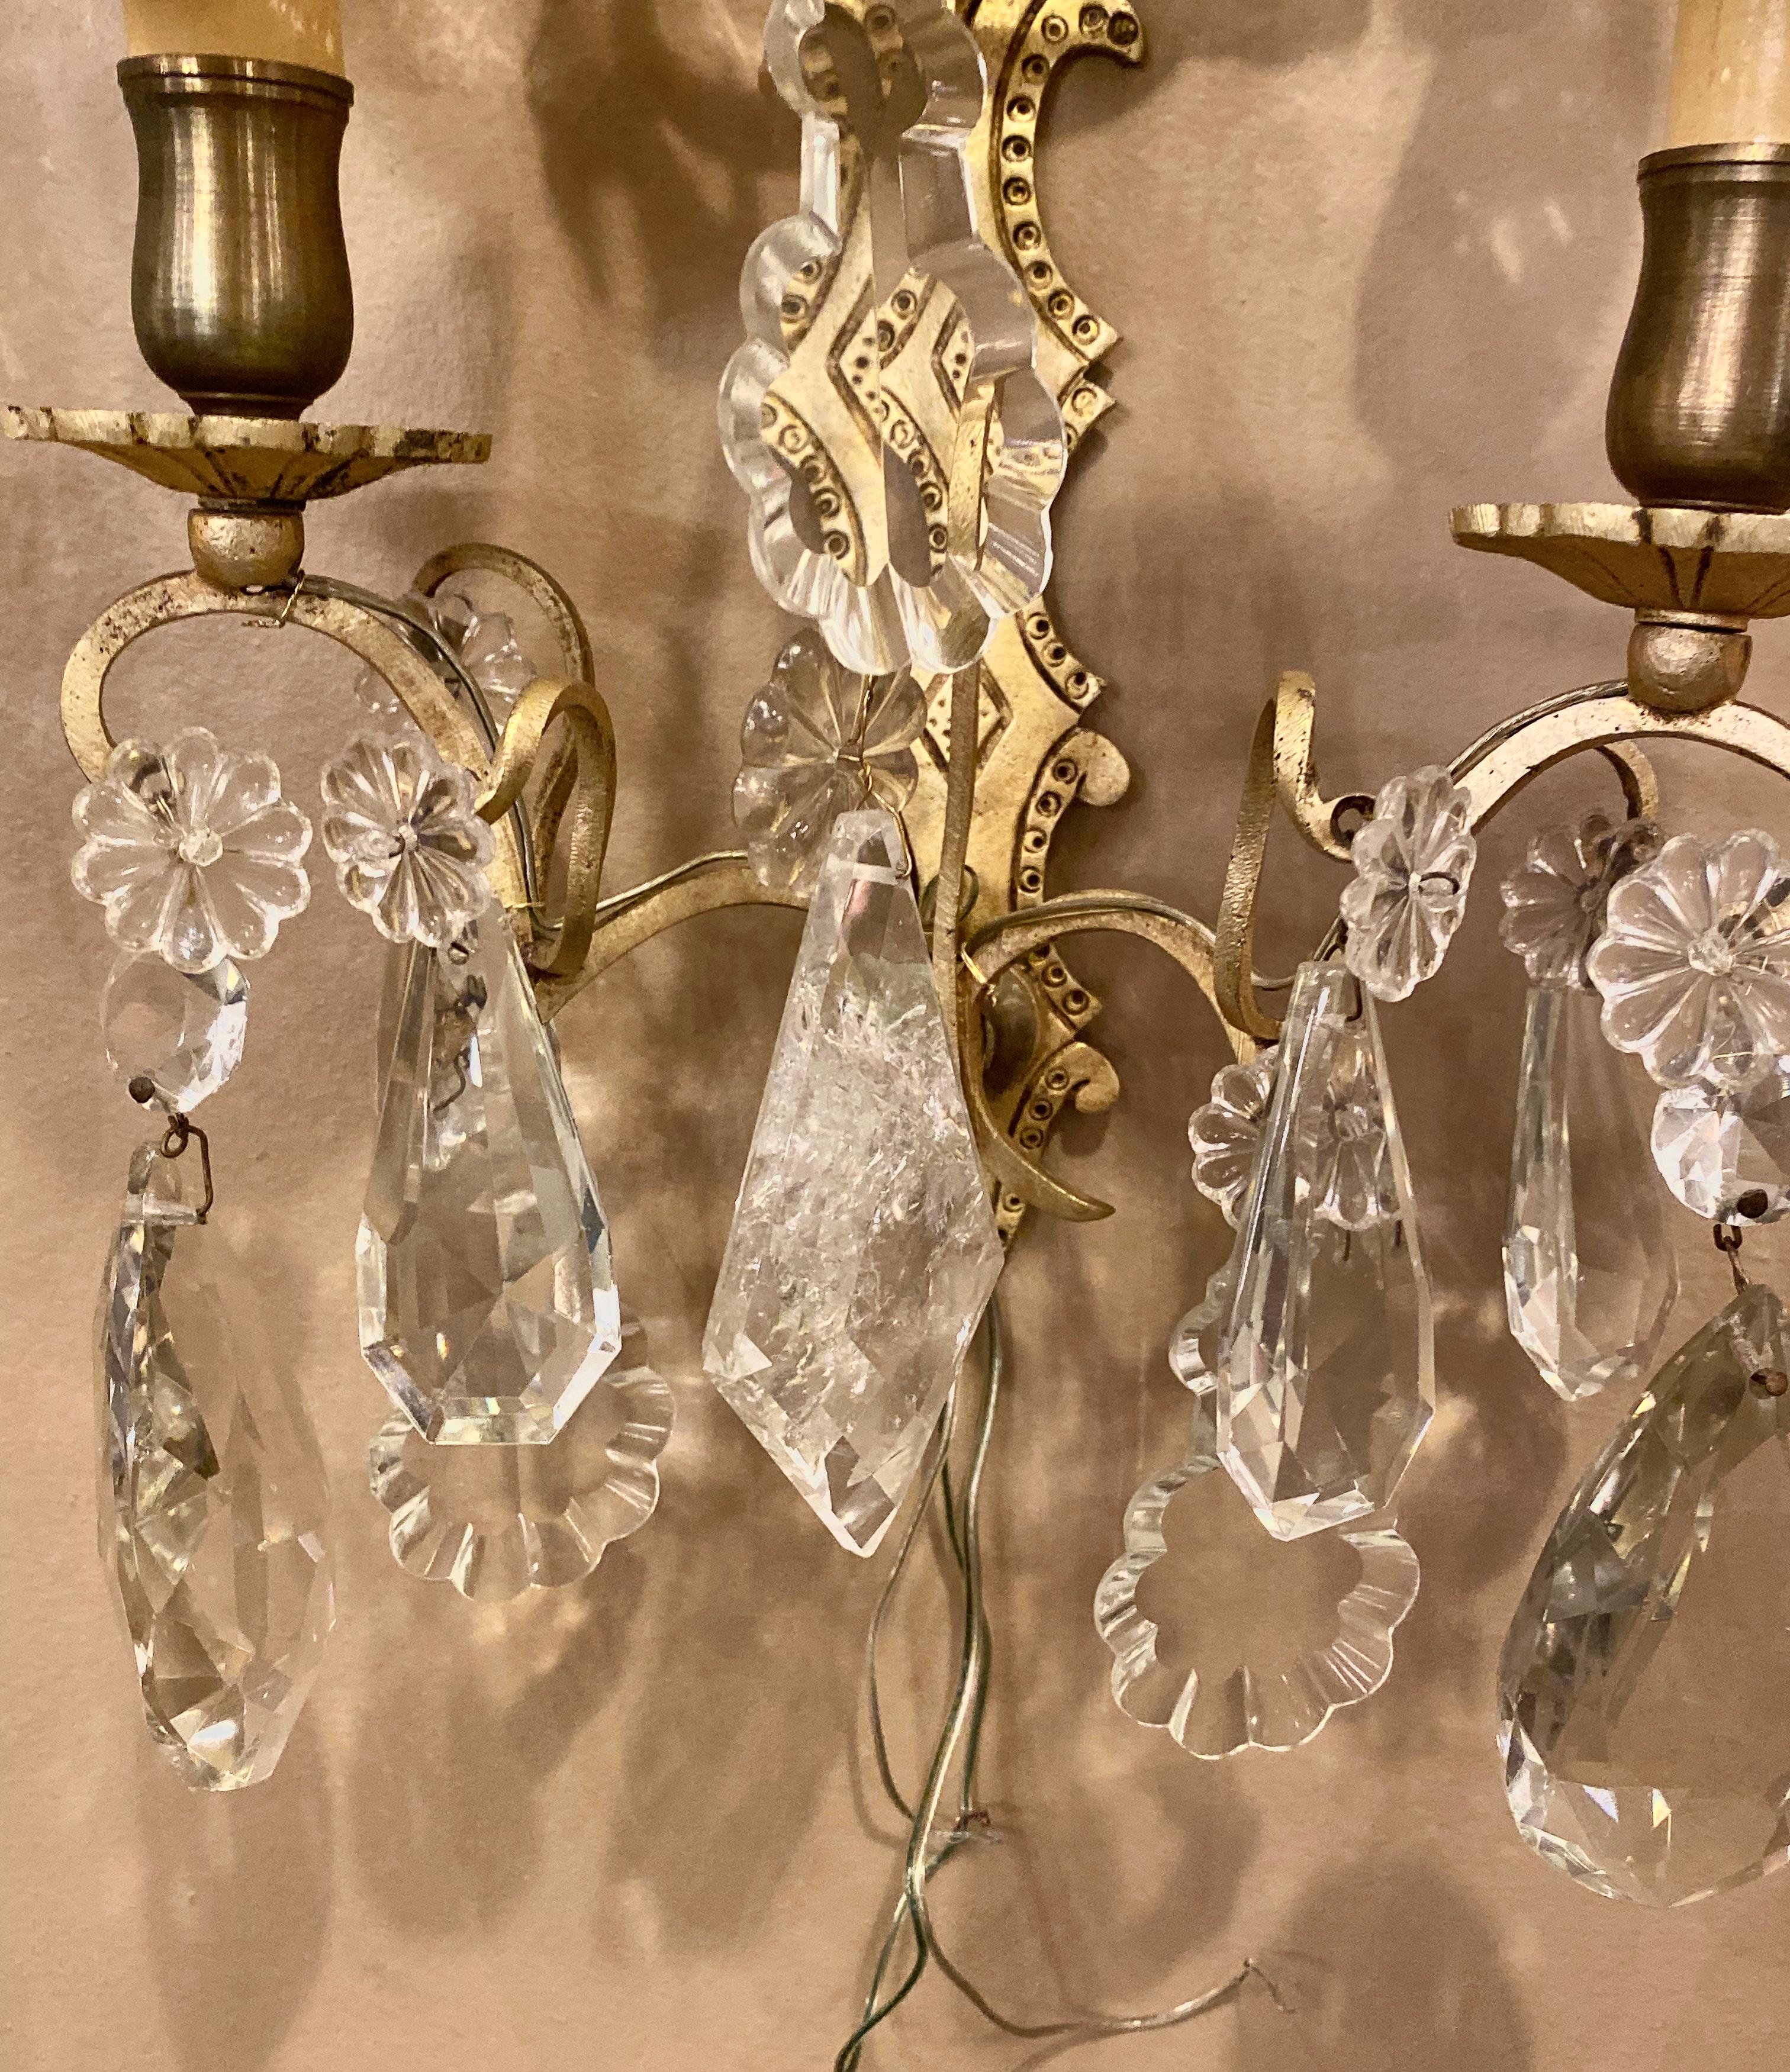 Pair of two light covered mixed crystal and rock crystal bronze wall sconces each having matching shield shade covers with solid bronze back plates.
1SX.